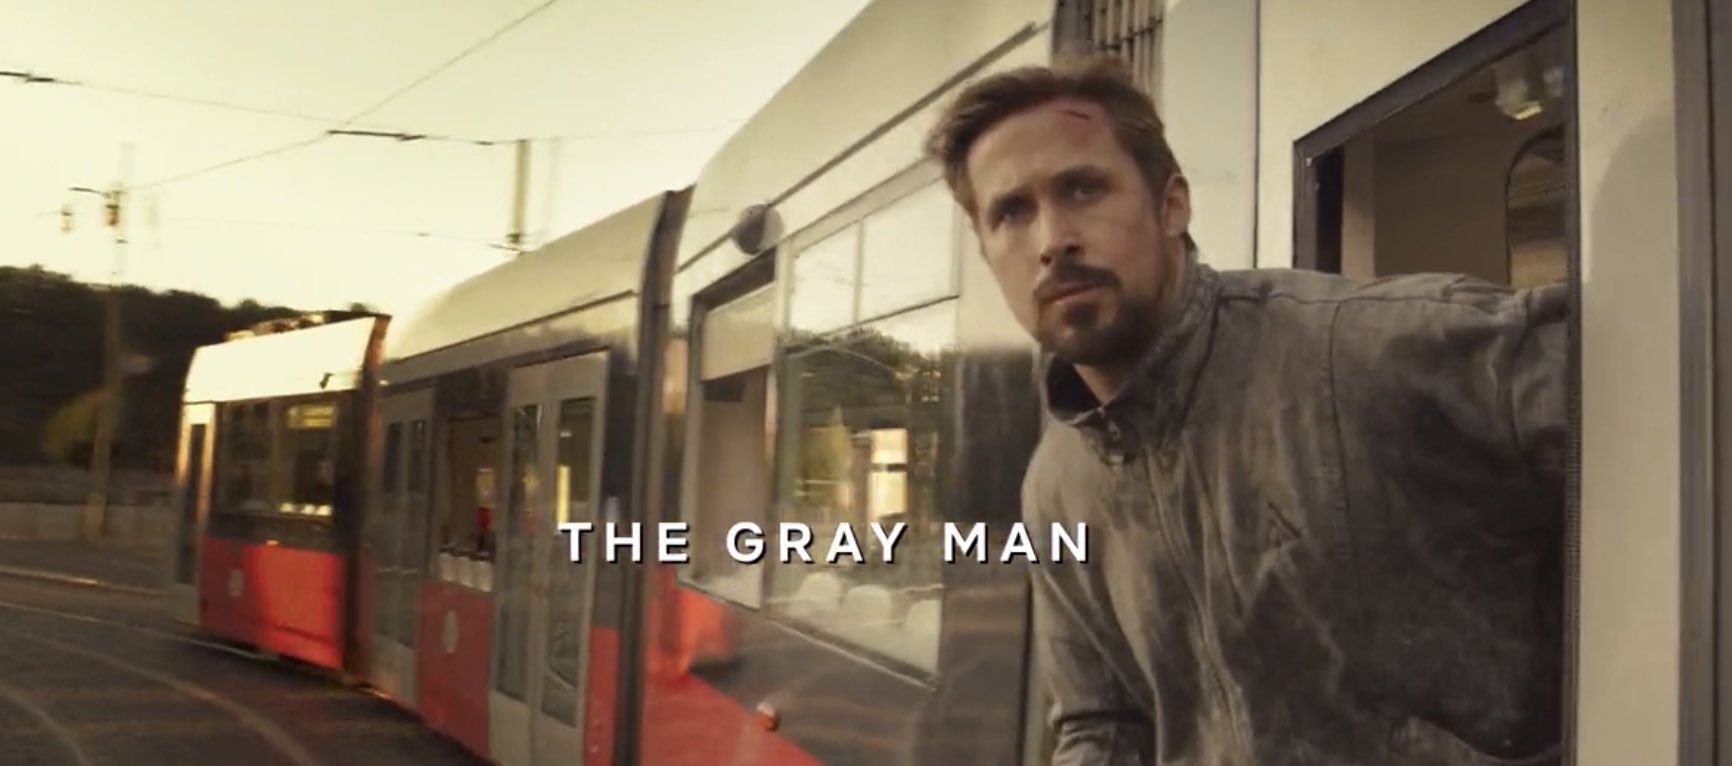 Review: 'The Gray Man' Is Netflix's Latest Solid-If-Unspectacular Actioner